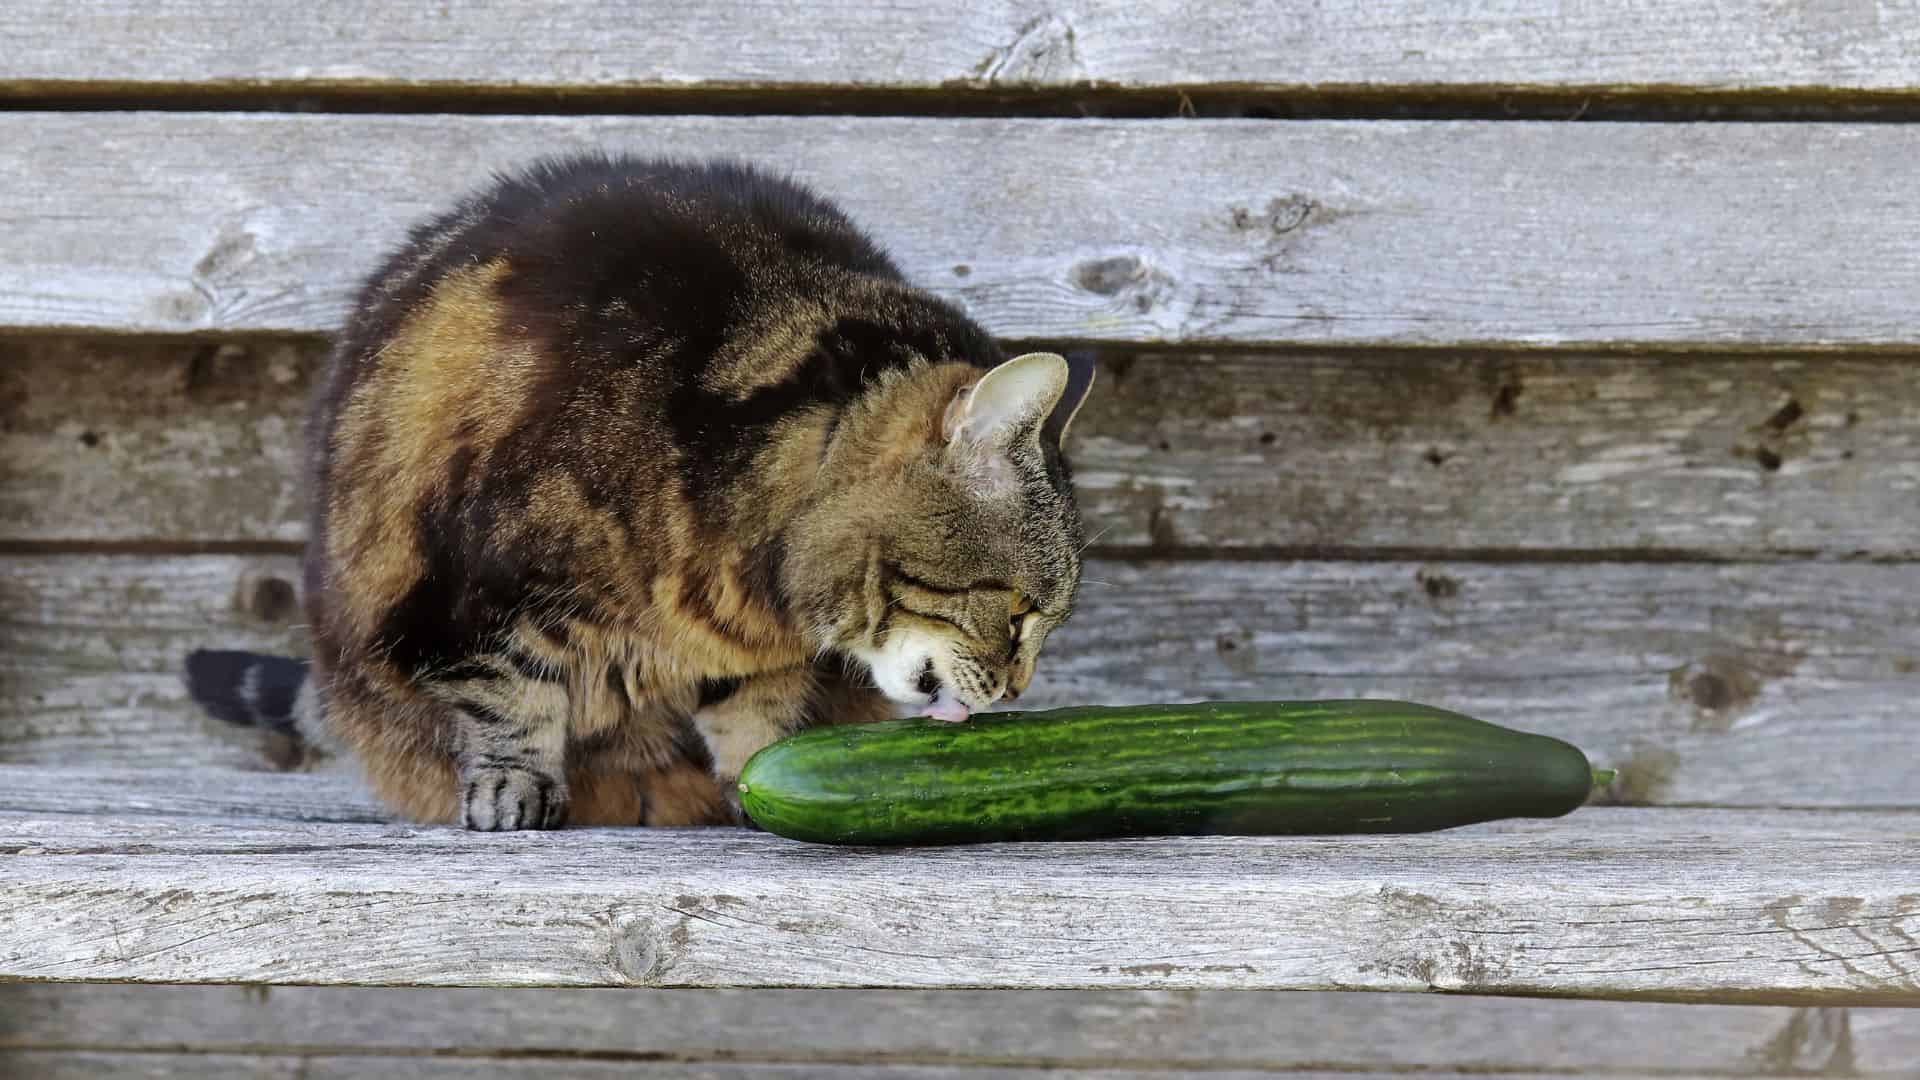 Cat sniffing the cucumber